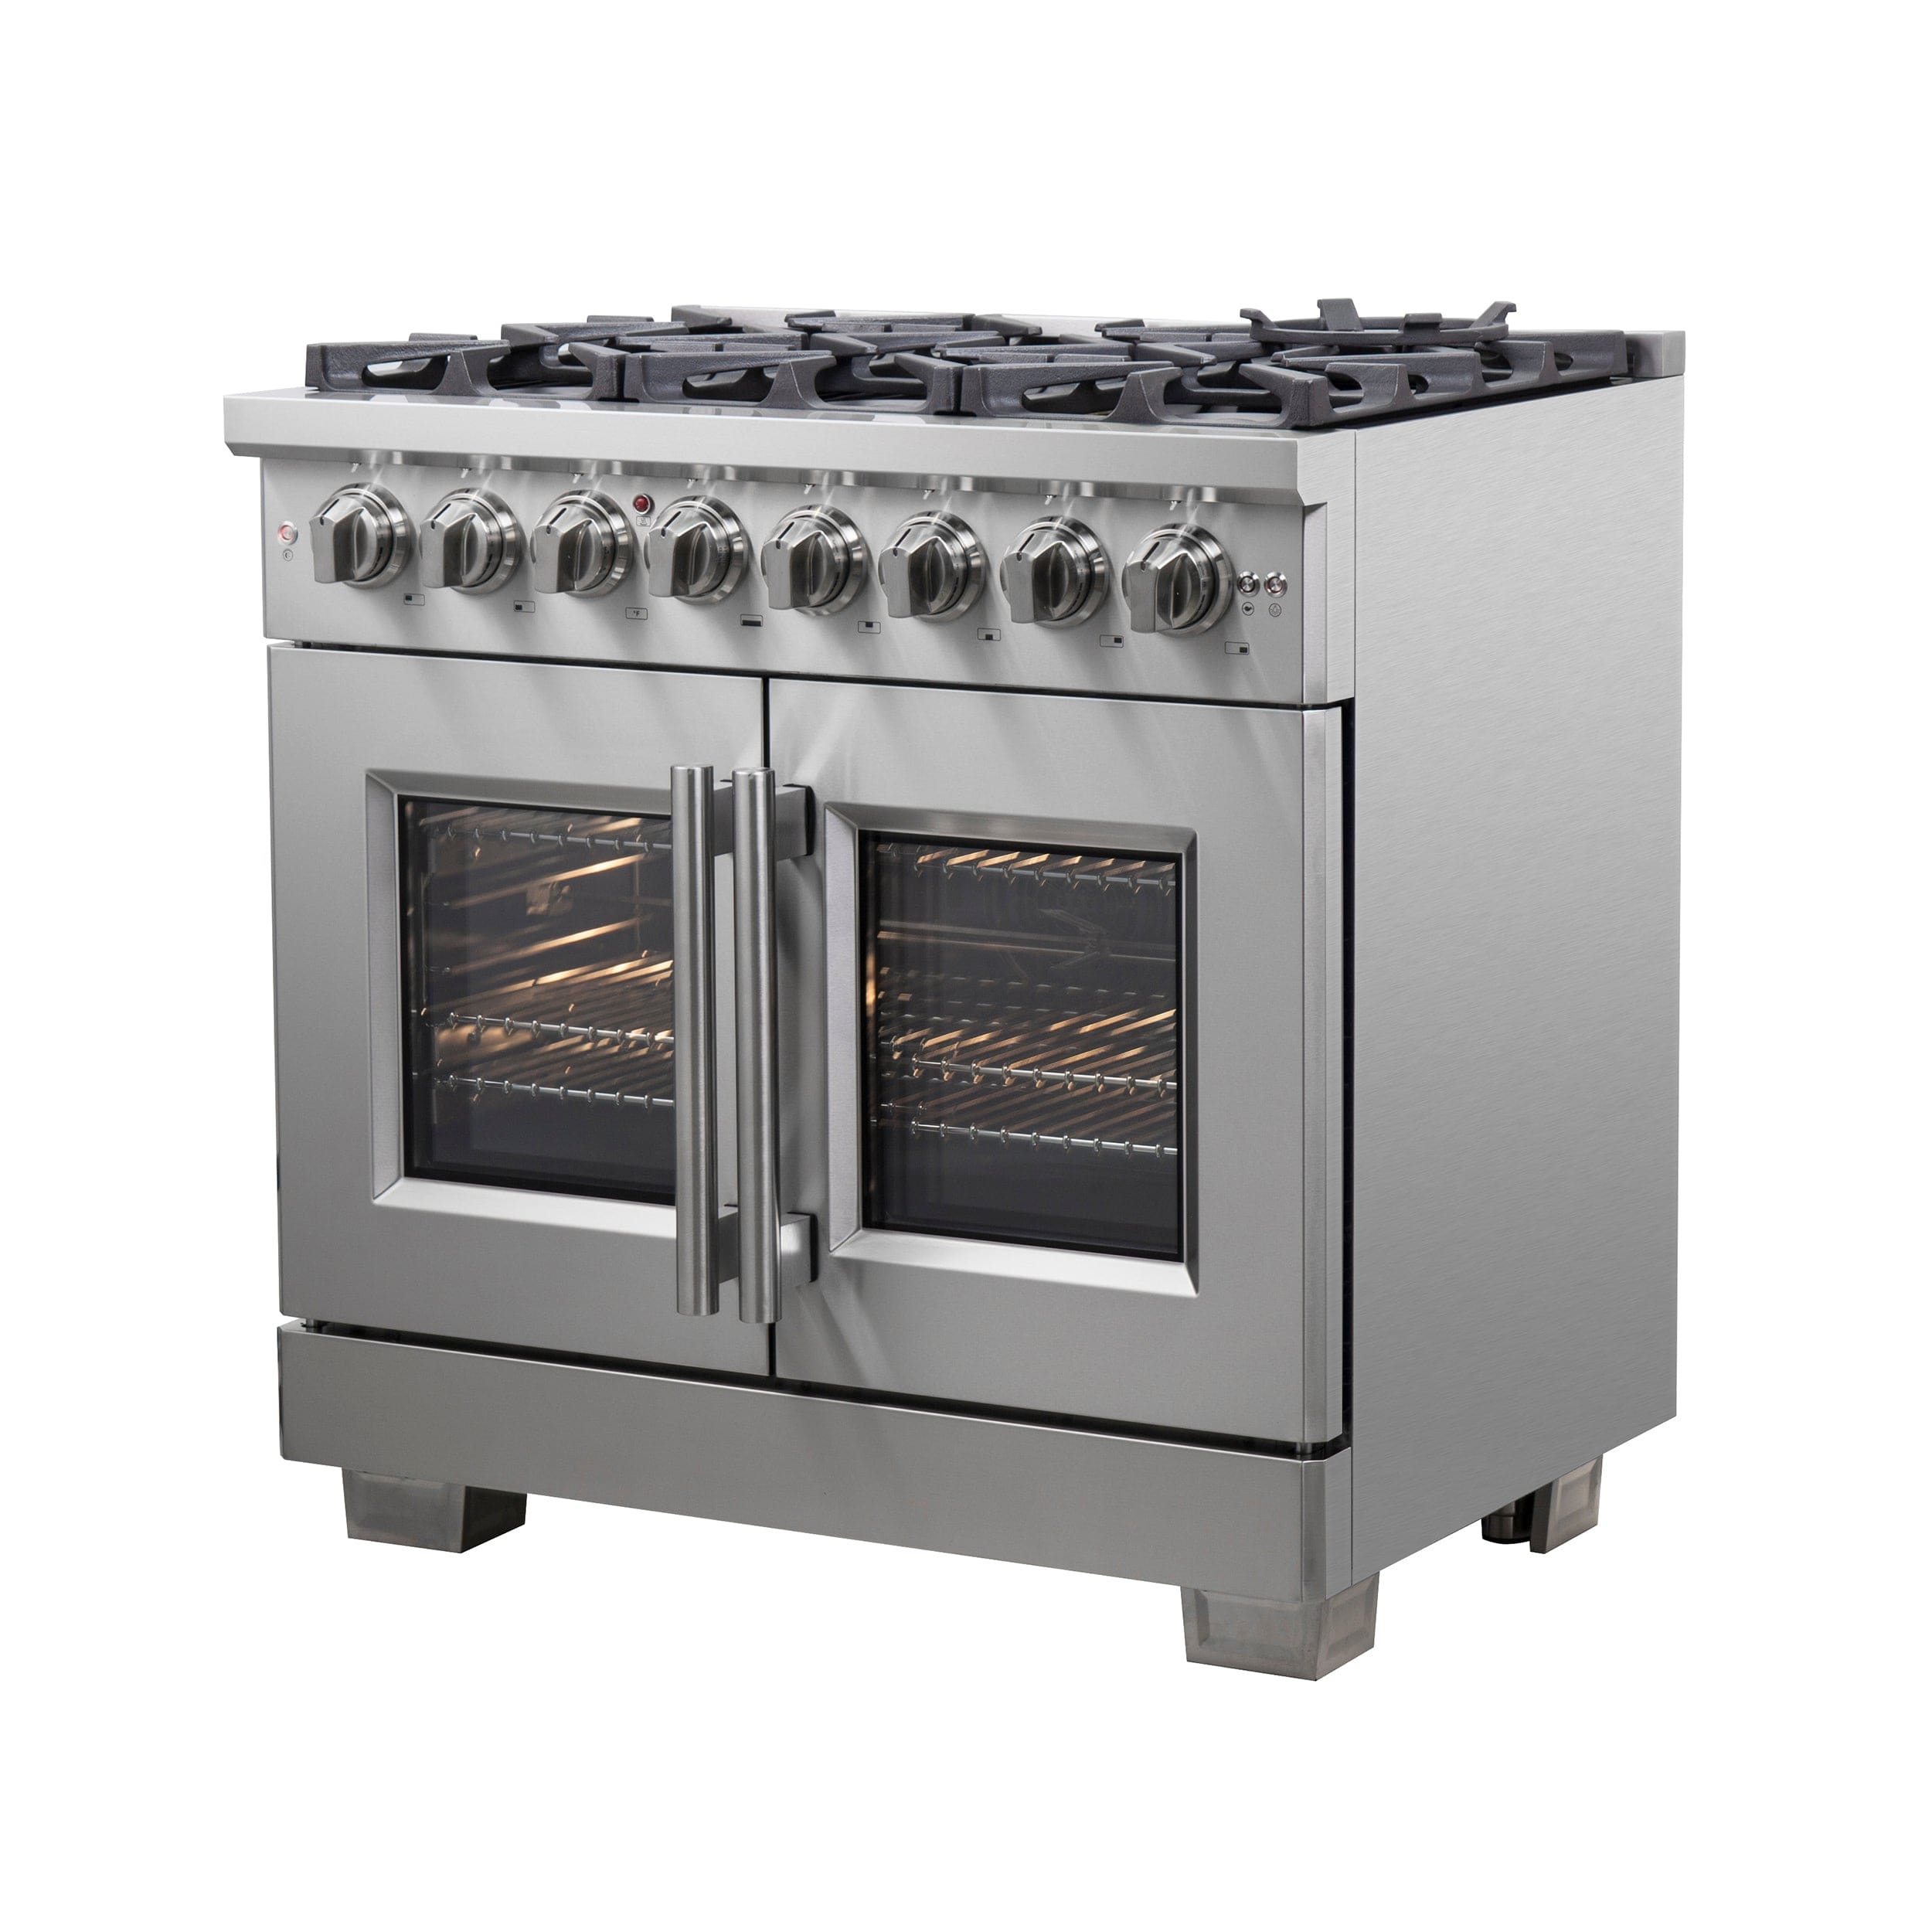 Forno Capriasca 36" Professional Gas Burner, Electric Oven Range With French Door And 6 Sealed Burners, FFSGS6387-36 Ranges FFSGS6387-36 Luxury Appliances Direct